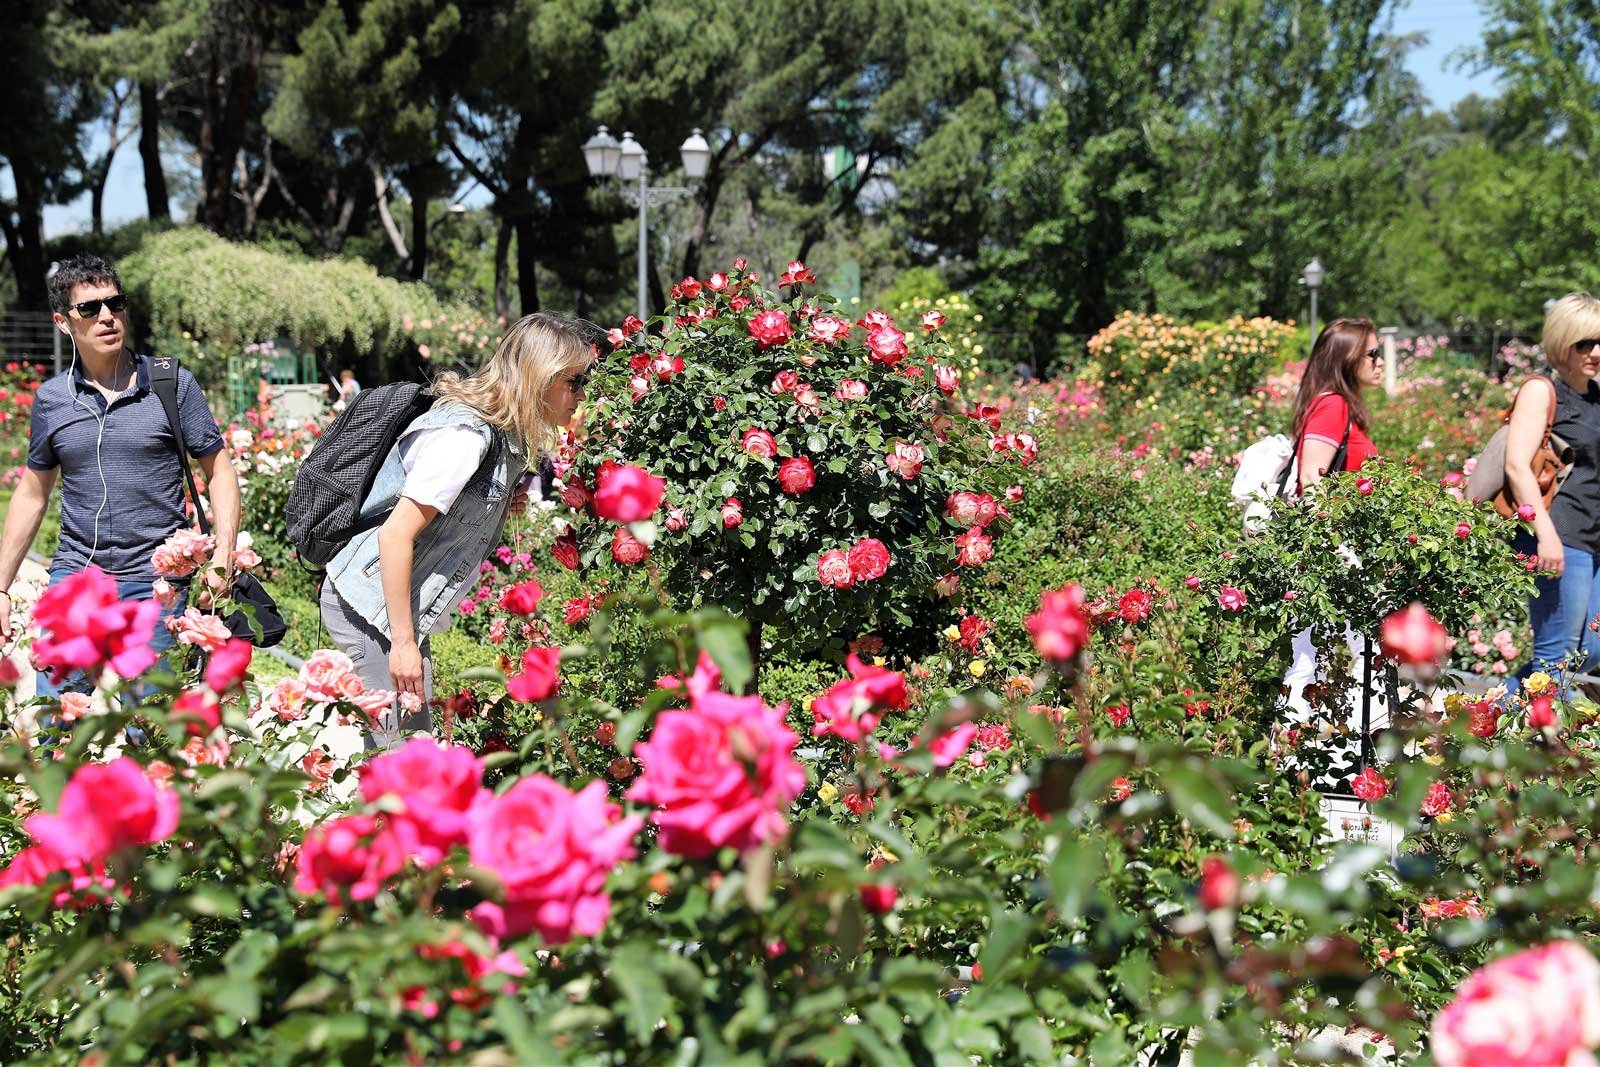 How to walk through the rose garden in the city park in Madrid